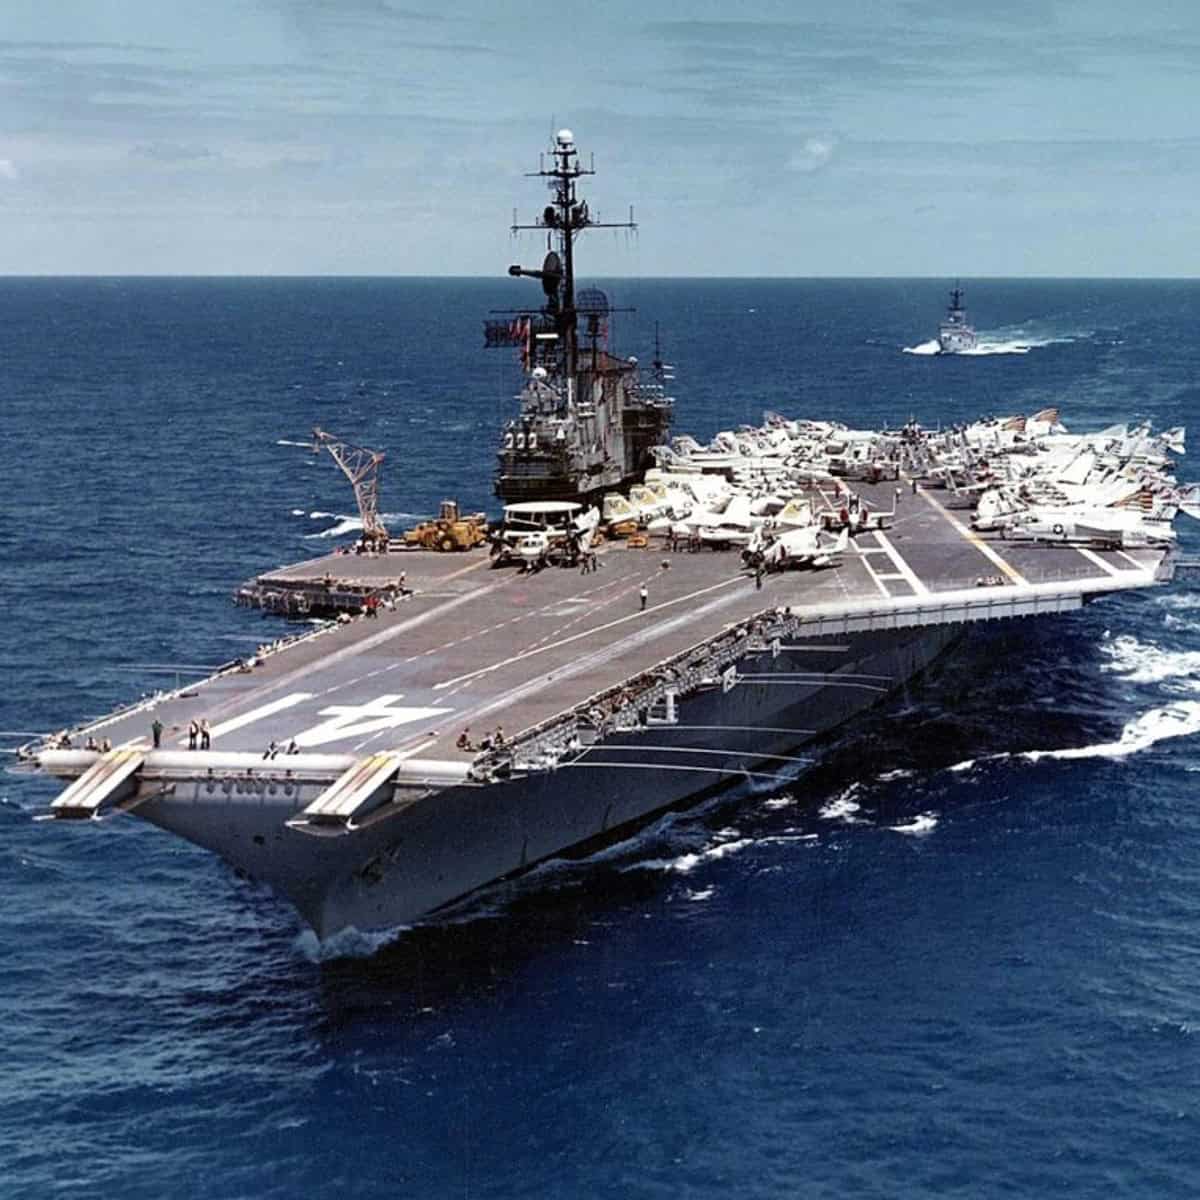 A large military aircraft carrier, the USS Midway, floating on a calm blue ocean. In the distance, a smaller ship is also visible.